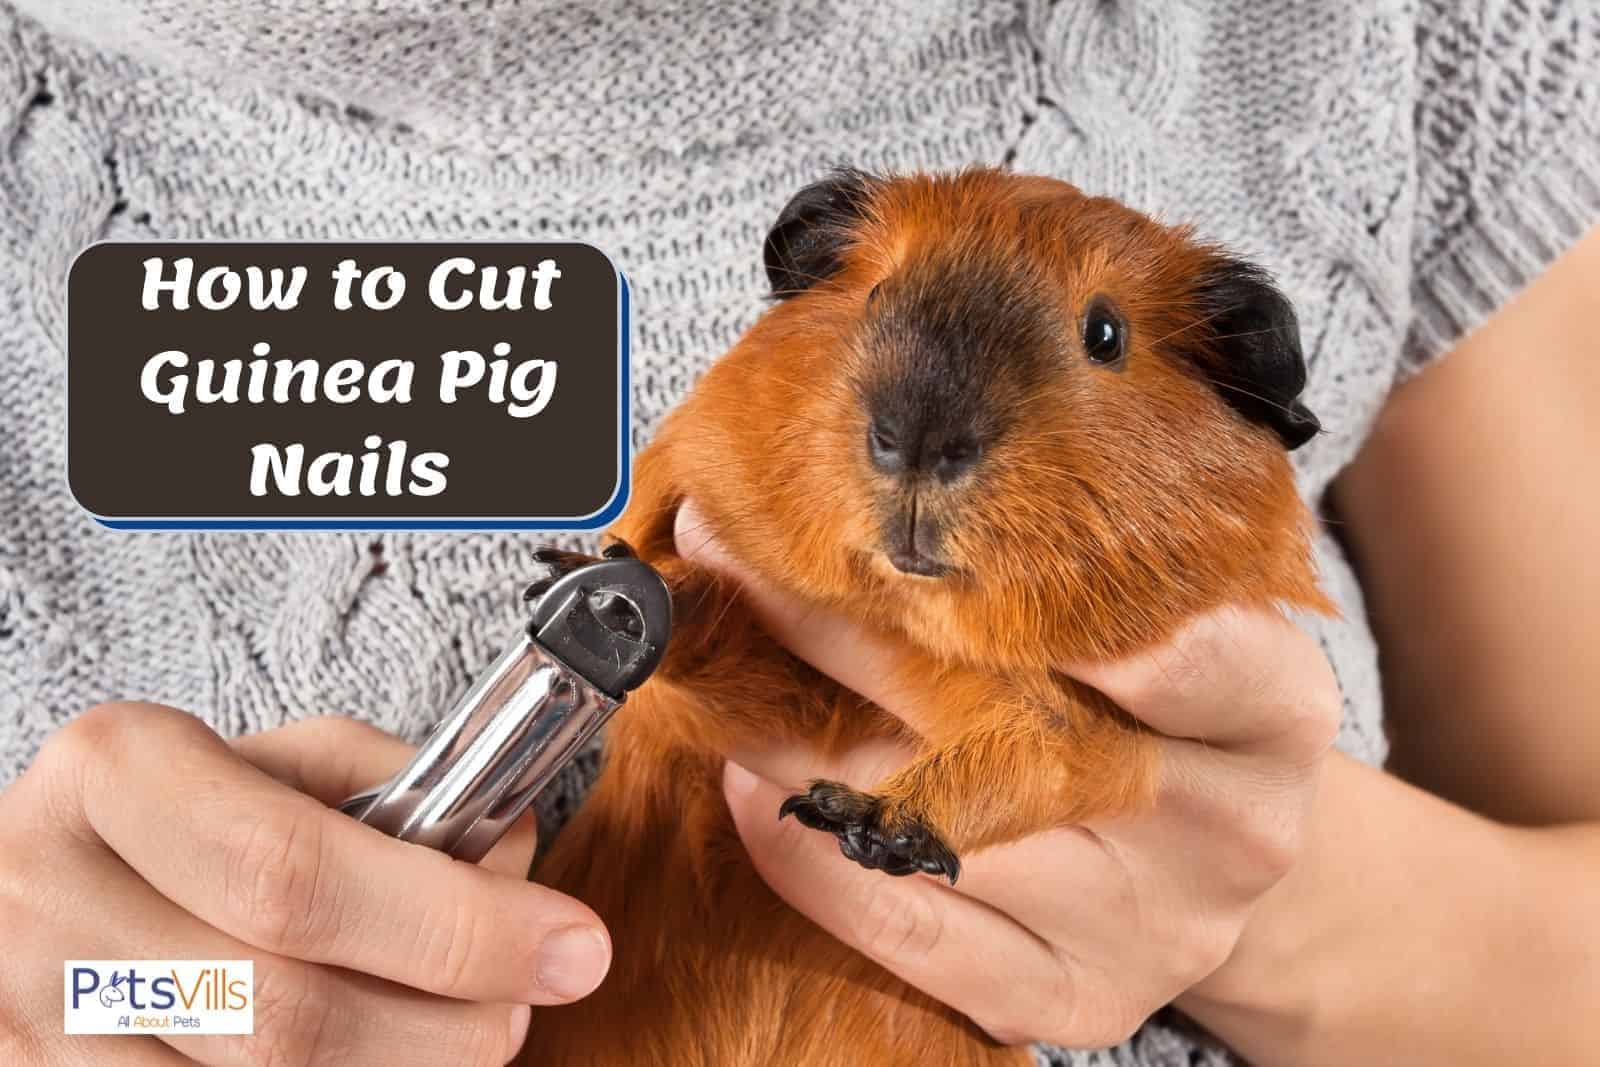 a lady showing a demonstration on how to cut guinea pig nails